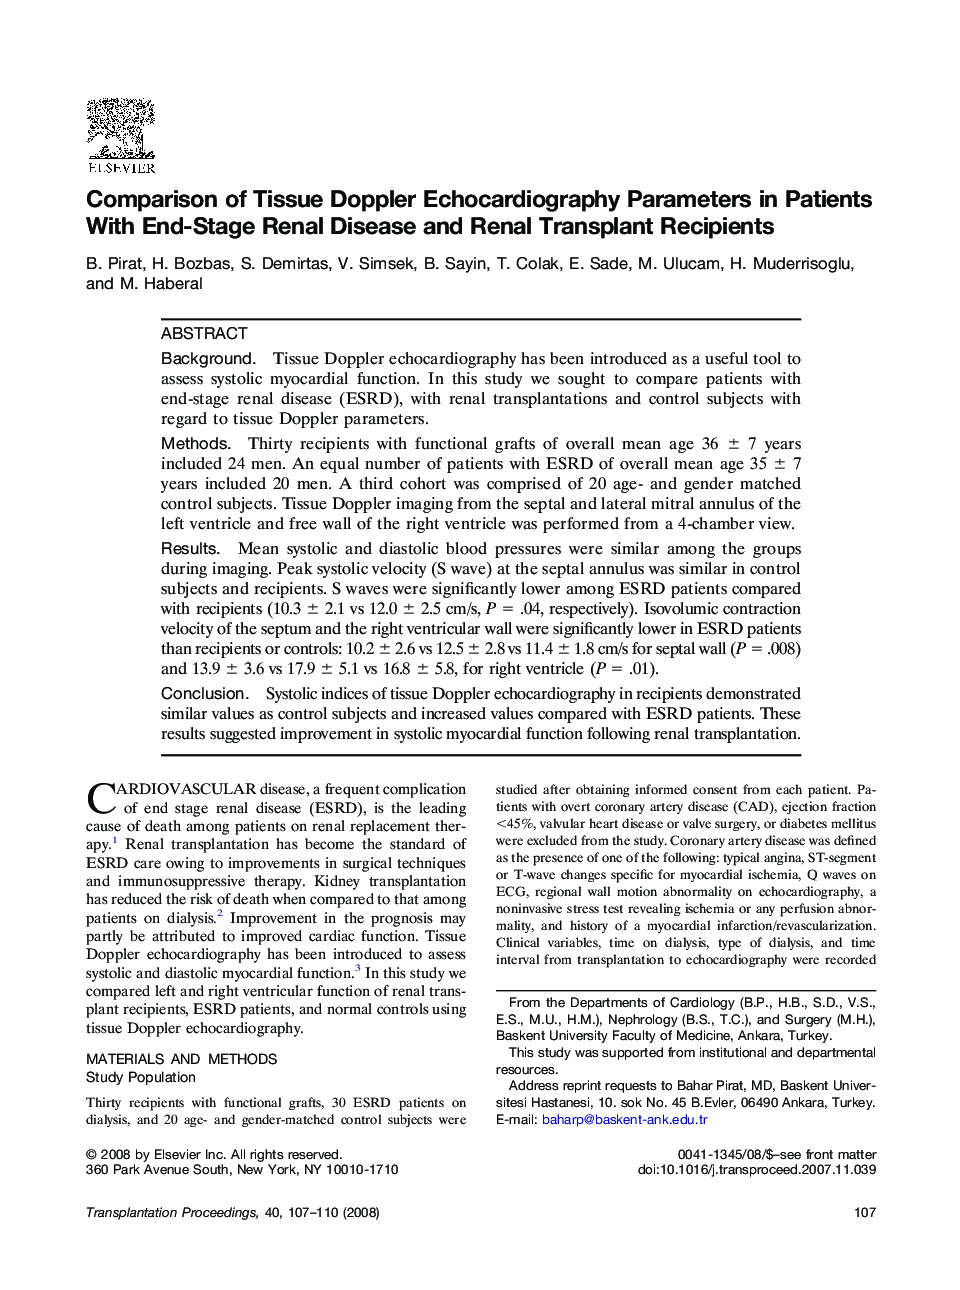 Comparison of Tissue Doppler Echocardiography Parameters in Patients With End-Stage Renal Disease and Renal Transplant Recipients 